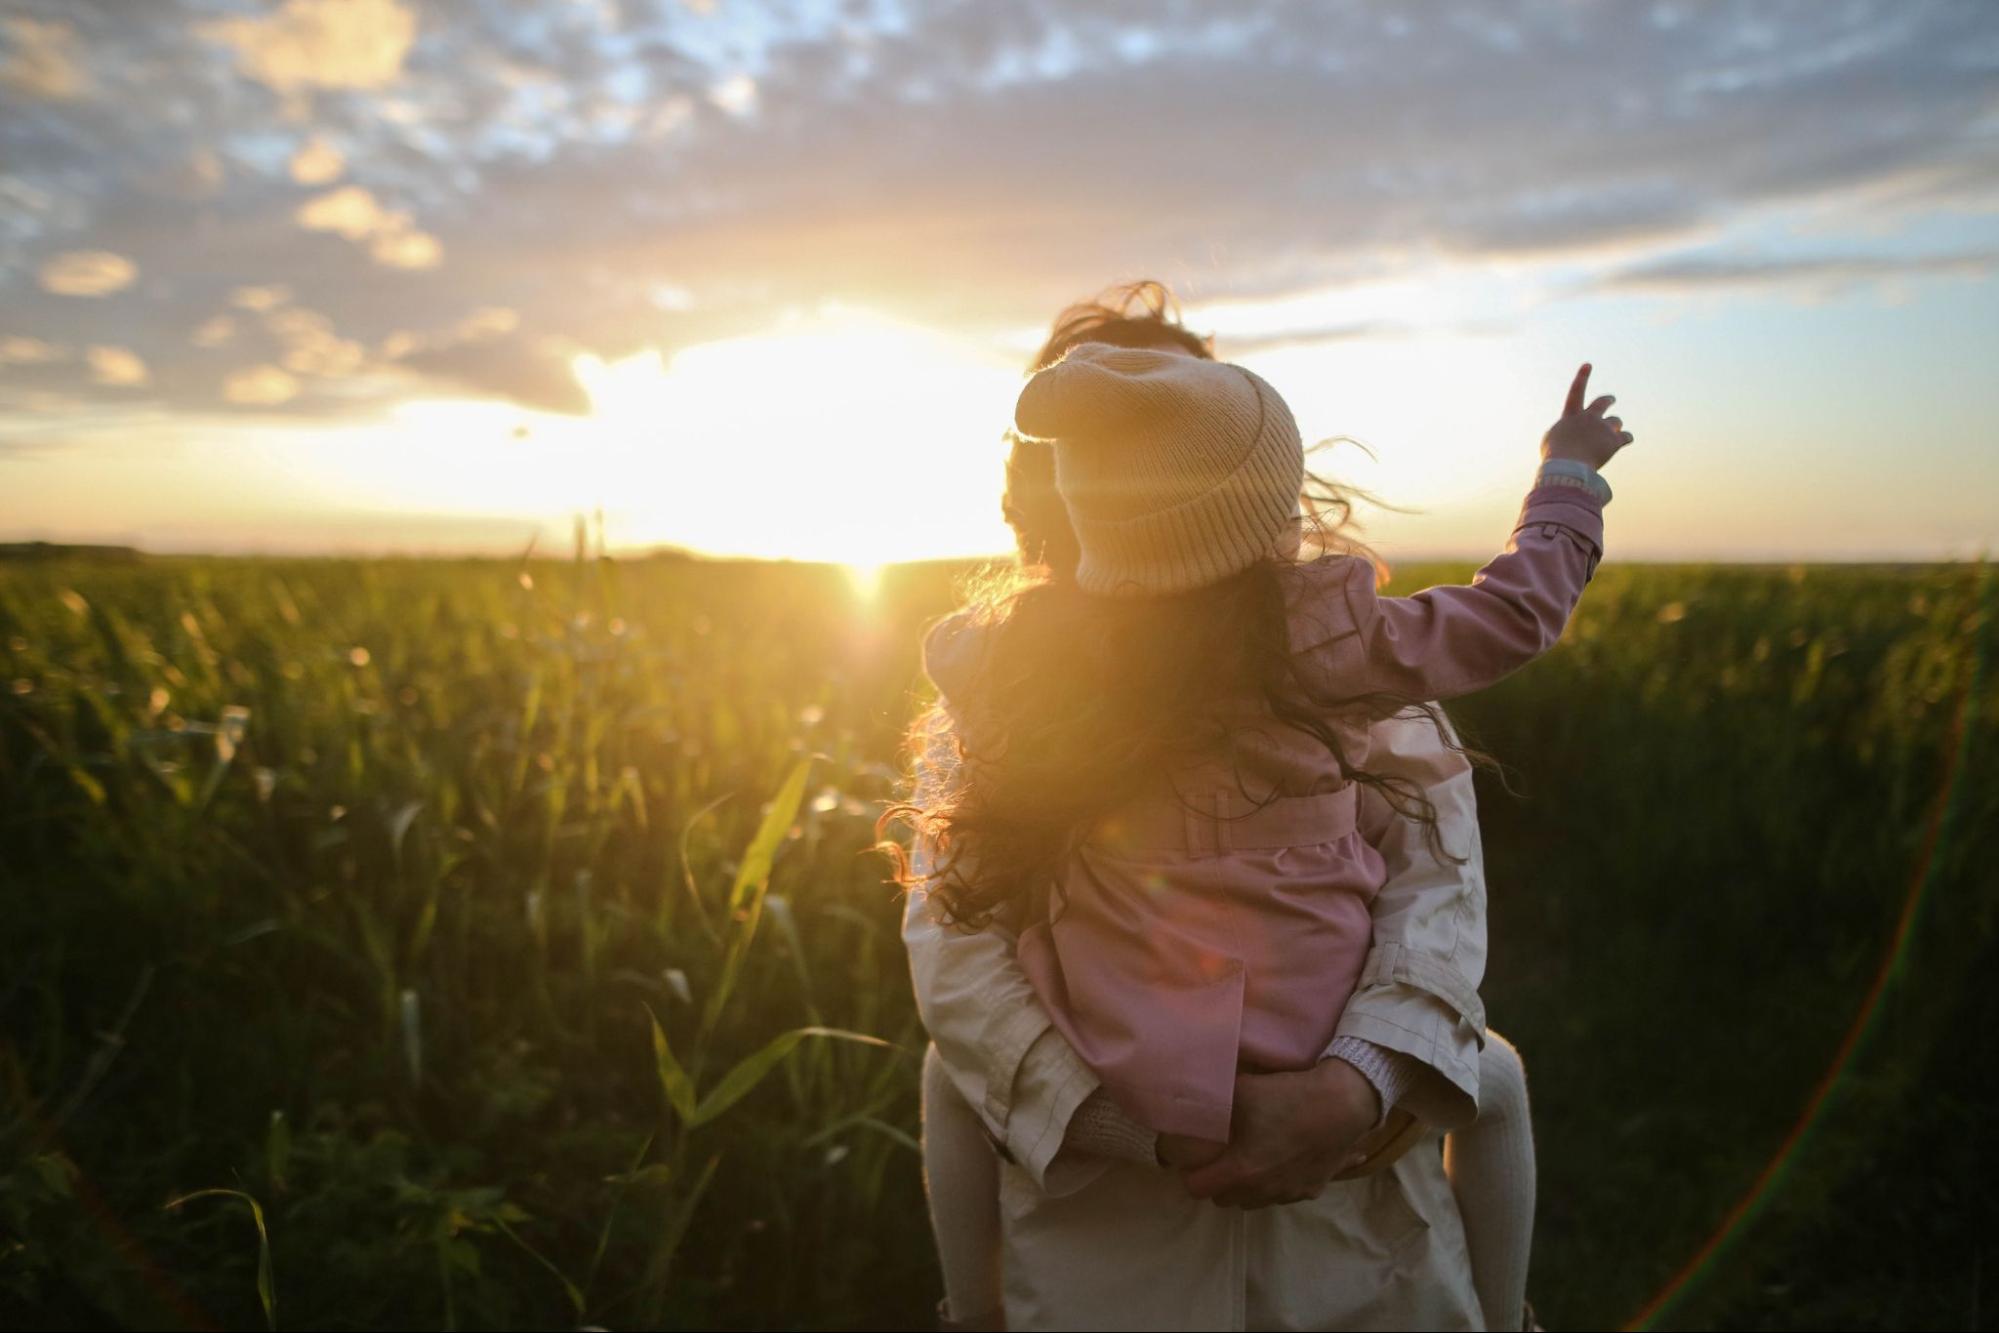 This is an image of a parent and child spending time together in a field at sunset.